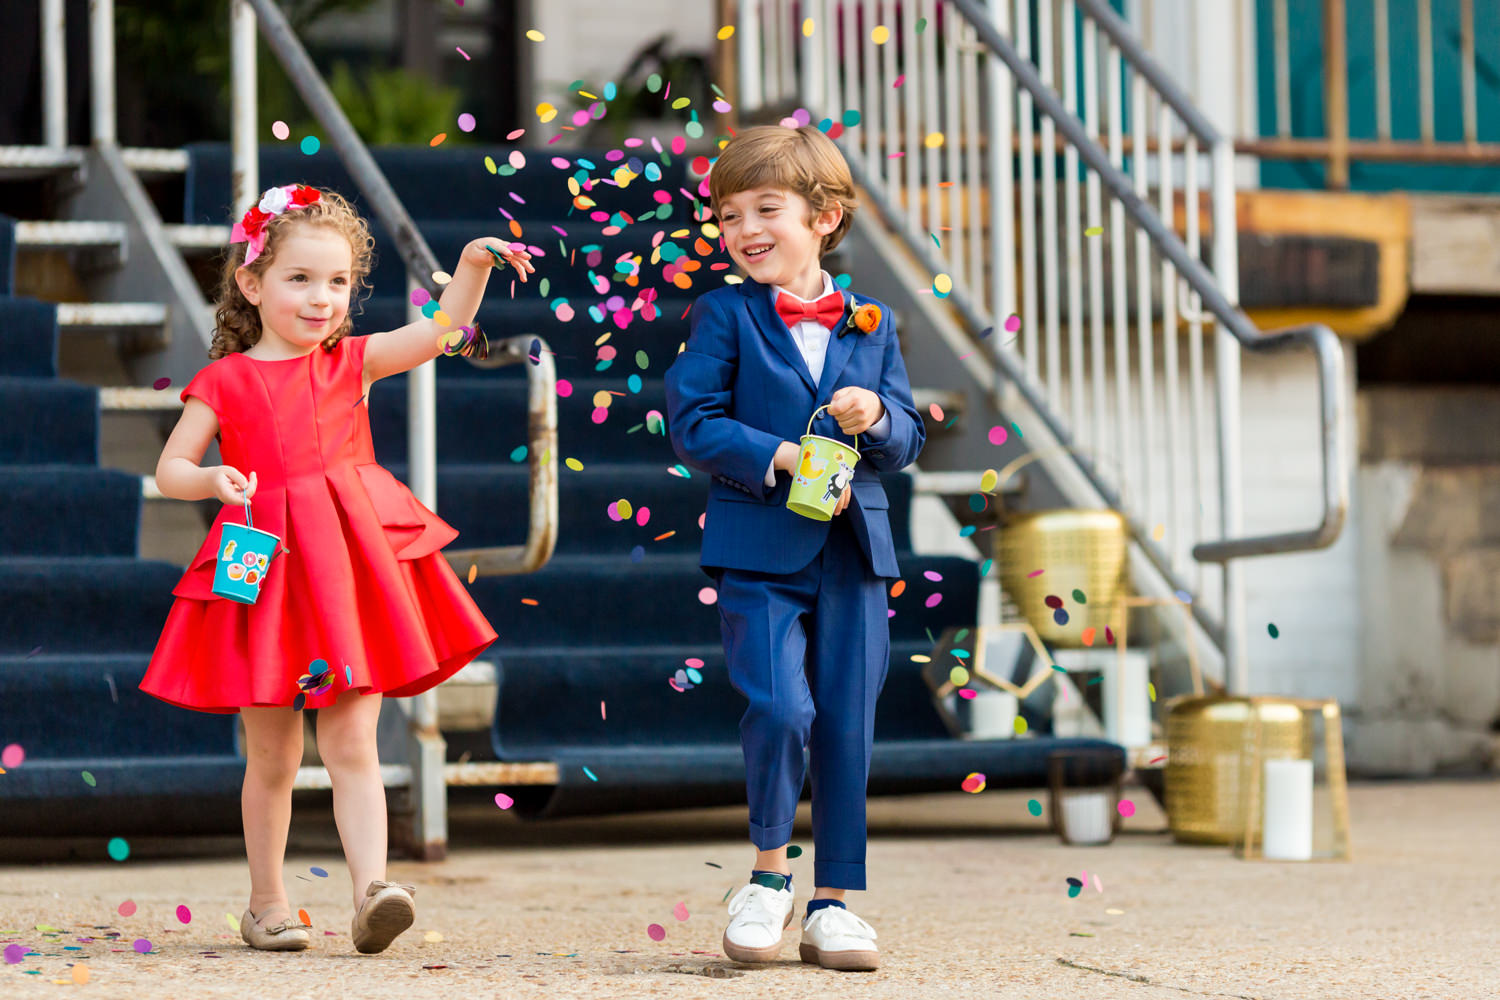 Washington DC, Union Market, Dock 5, this was an outdoor ceremony with the flower girl and ring bearer throwing rainbow confetti as they walk down the aisle, the ring bearer is in a cobalt blue suit and a coral tie and the flower girl is in a bright coral dress, they are giggling and confetti is all around them, Procopio Photography, best top Washington DC photographer, best top Maryland photographer, best top Virginia photographer, best top DMV photographer, best top wedding photographer, best top commercial photographer, best top portrait photographer, best top boudoir photographer, modern fine art portraits, dramatic, unique, different, bold, editorial, photojournalism, award winning photographer, published photographer, memorable images, be different, stand out